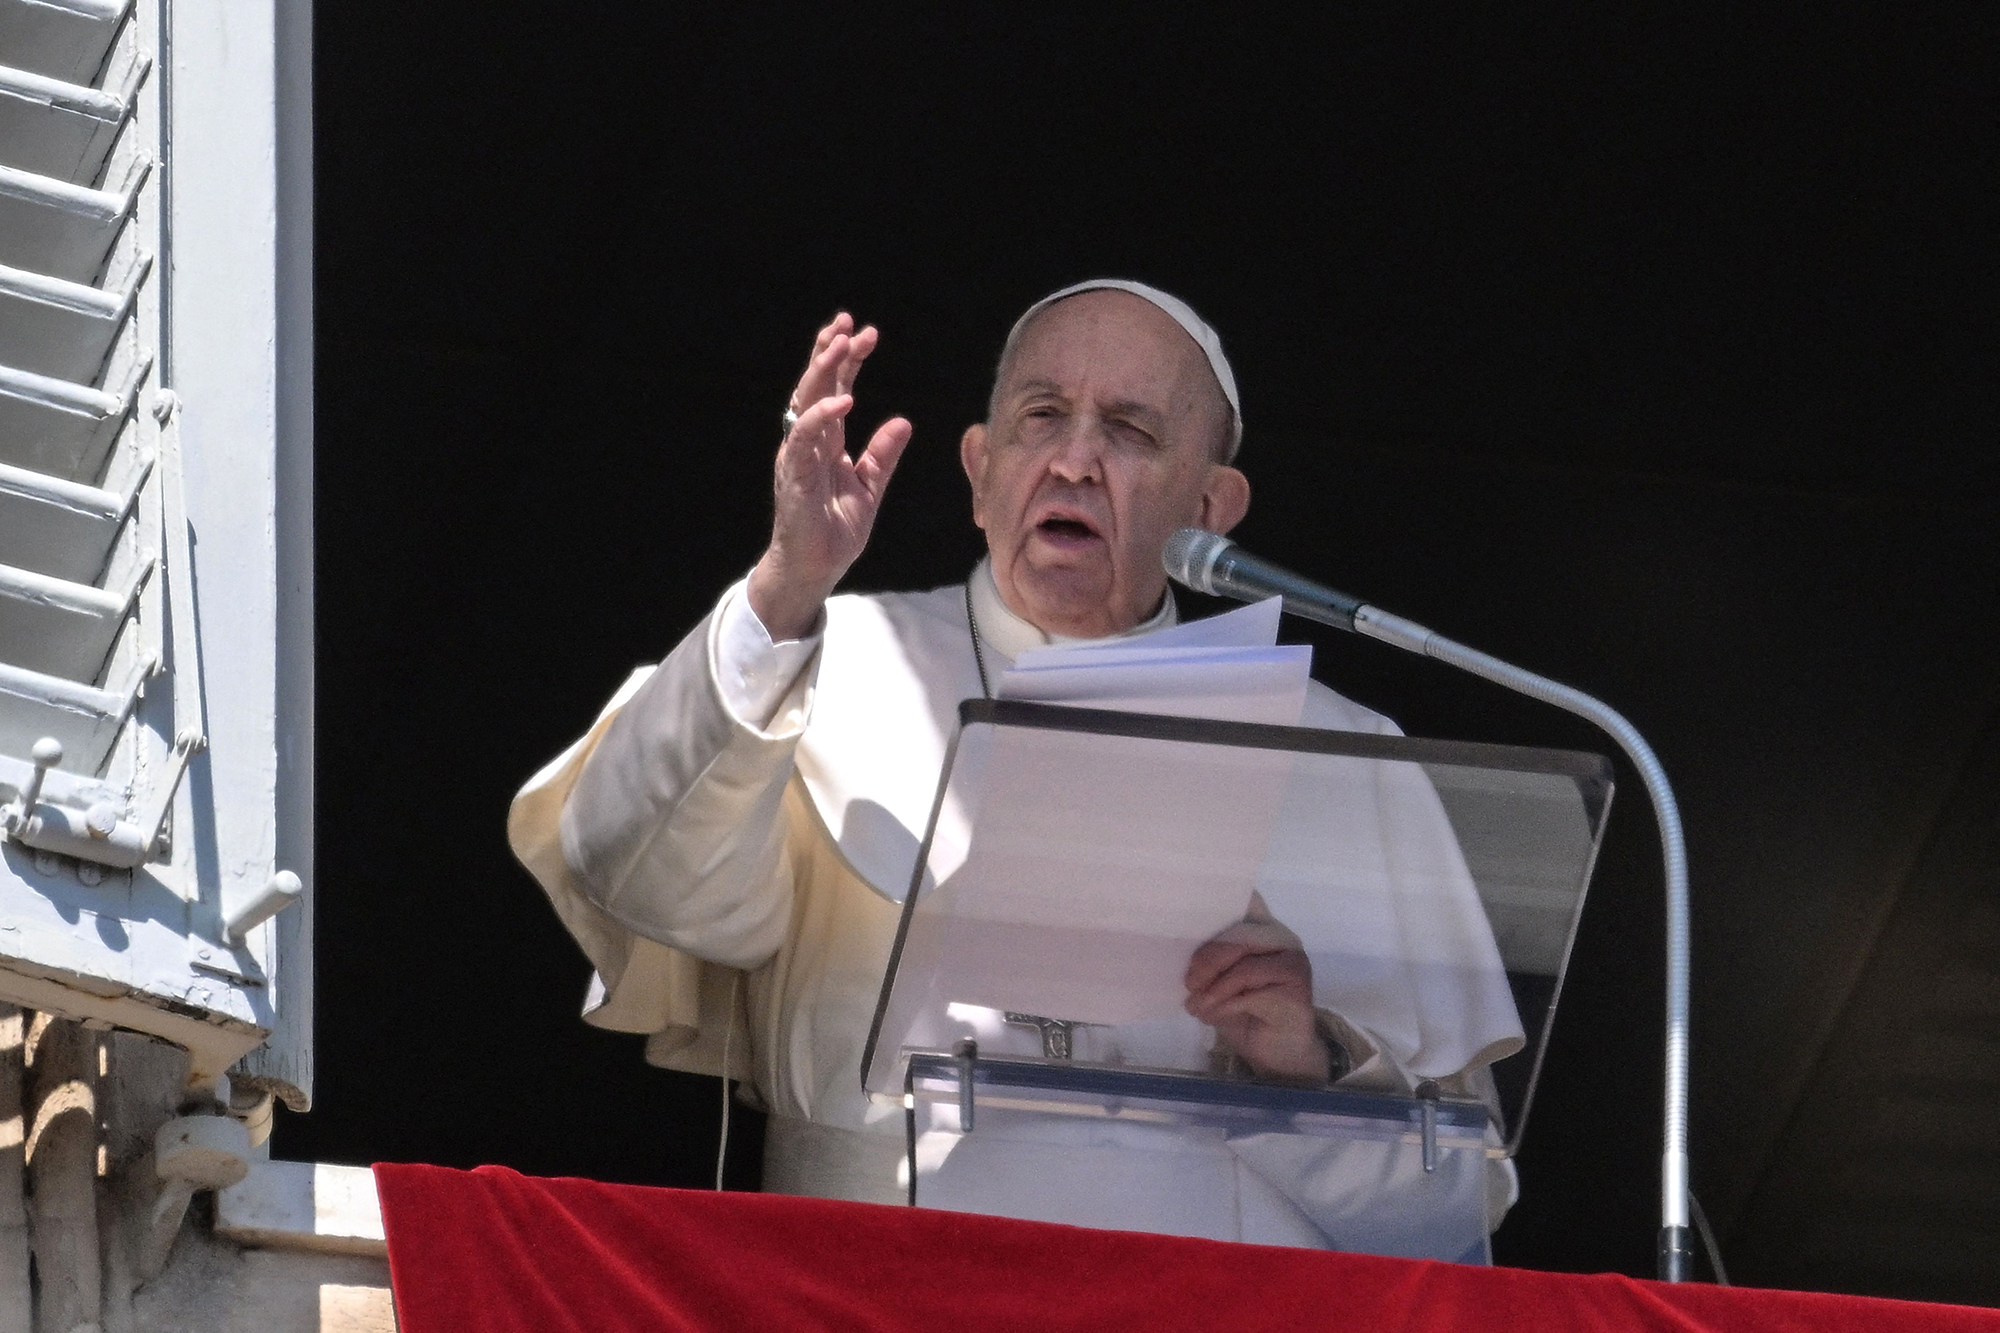 Pope Francis pleads “in the name of God” to stop attacks on Ukraine – CNN